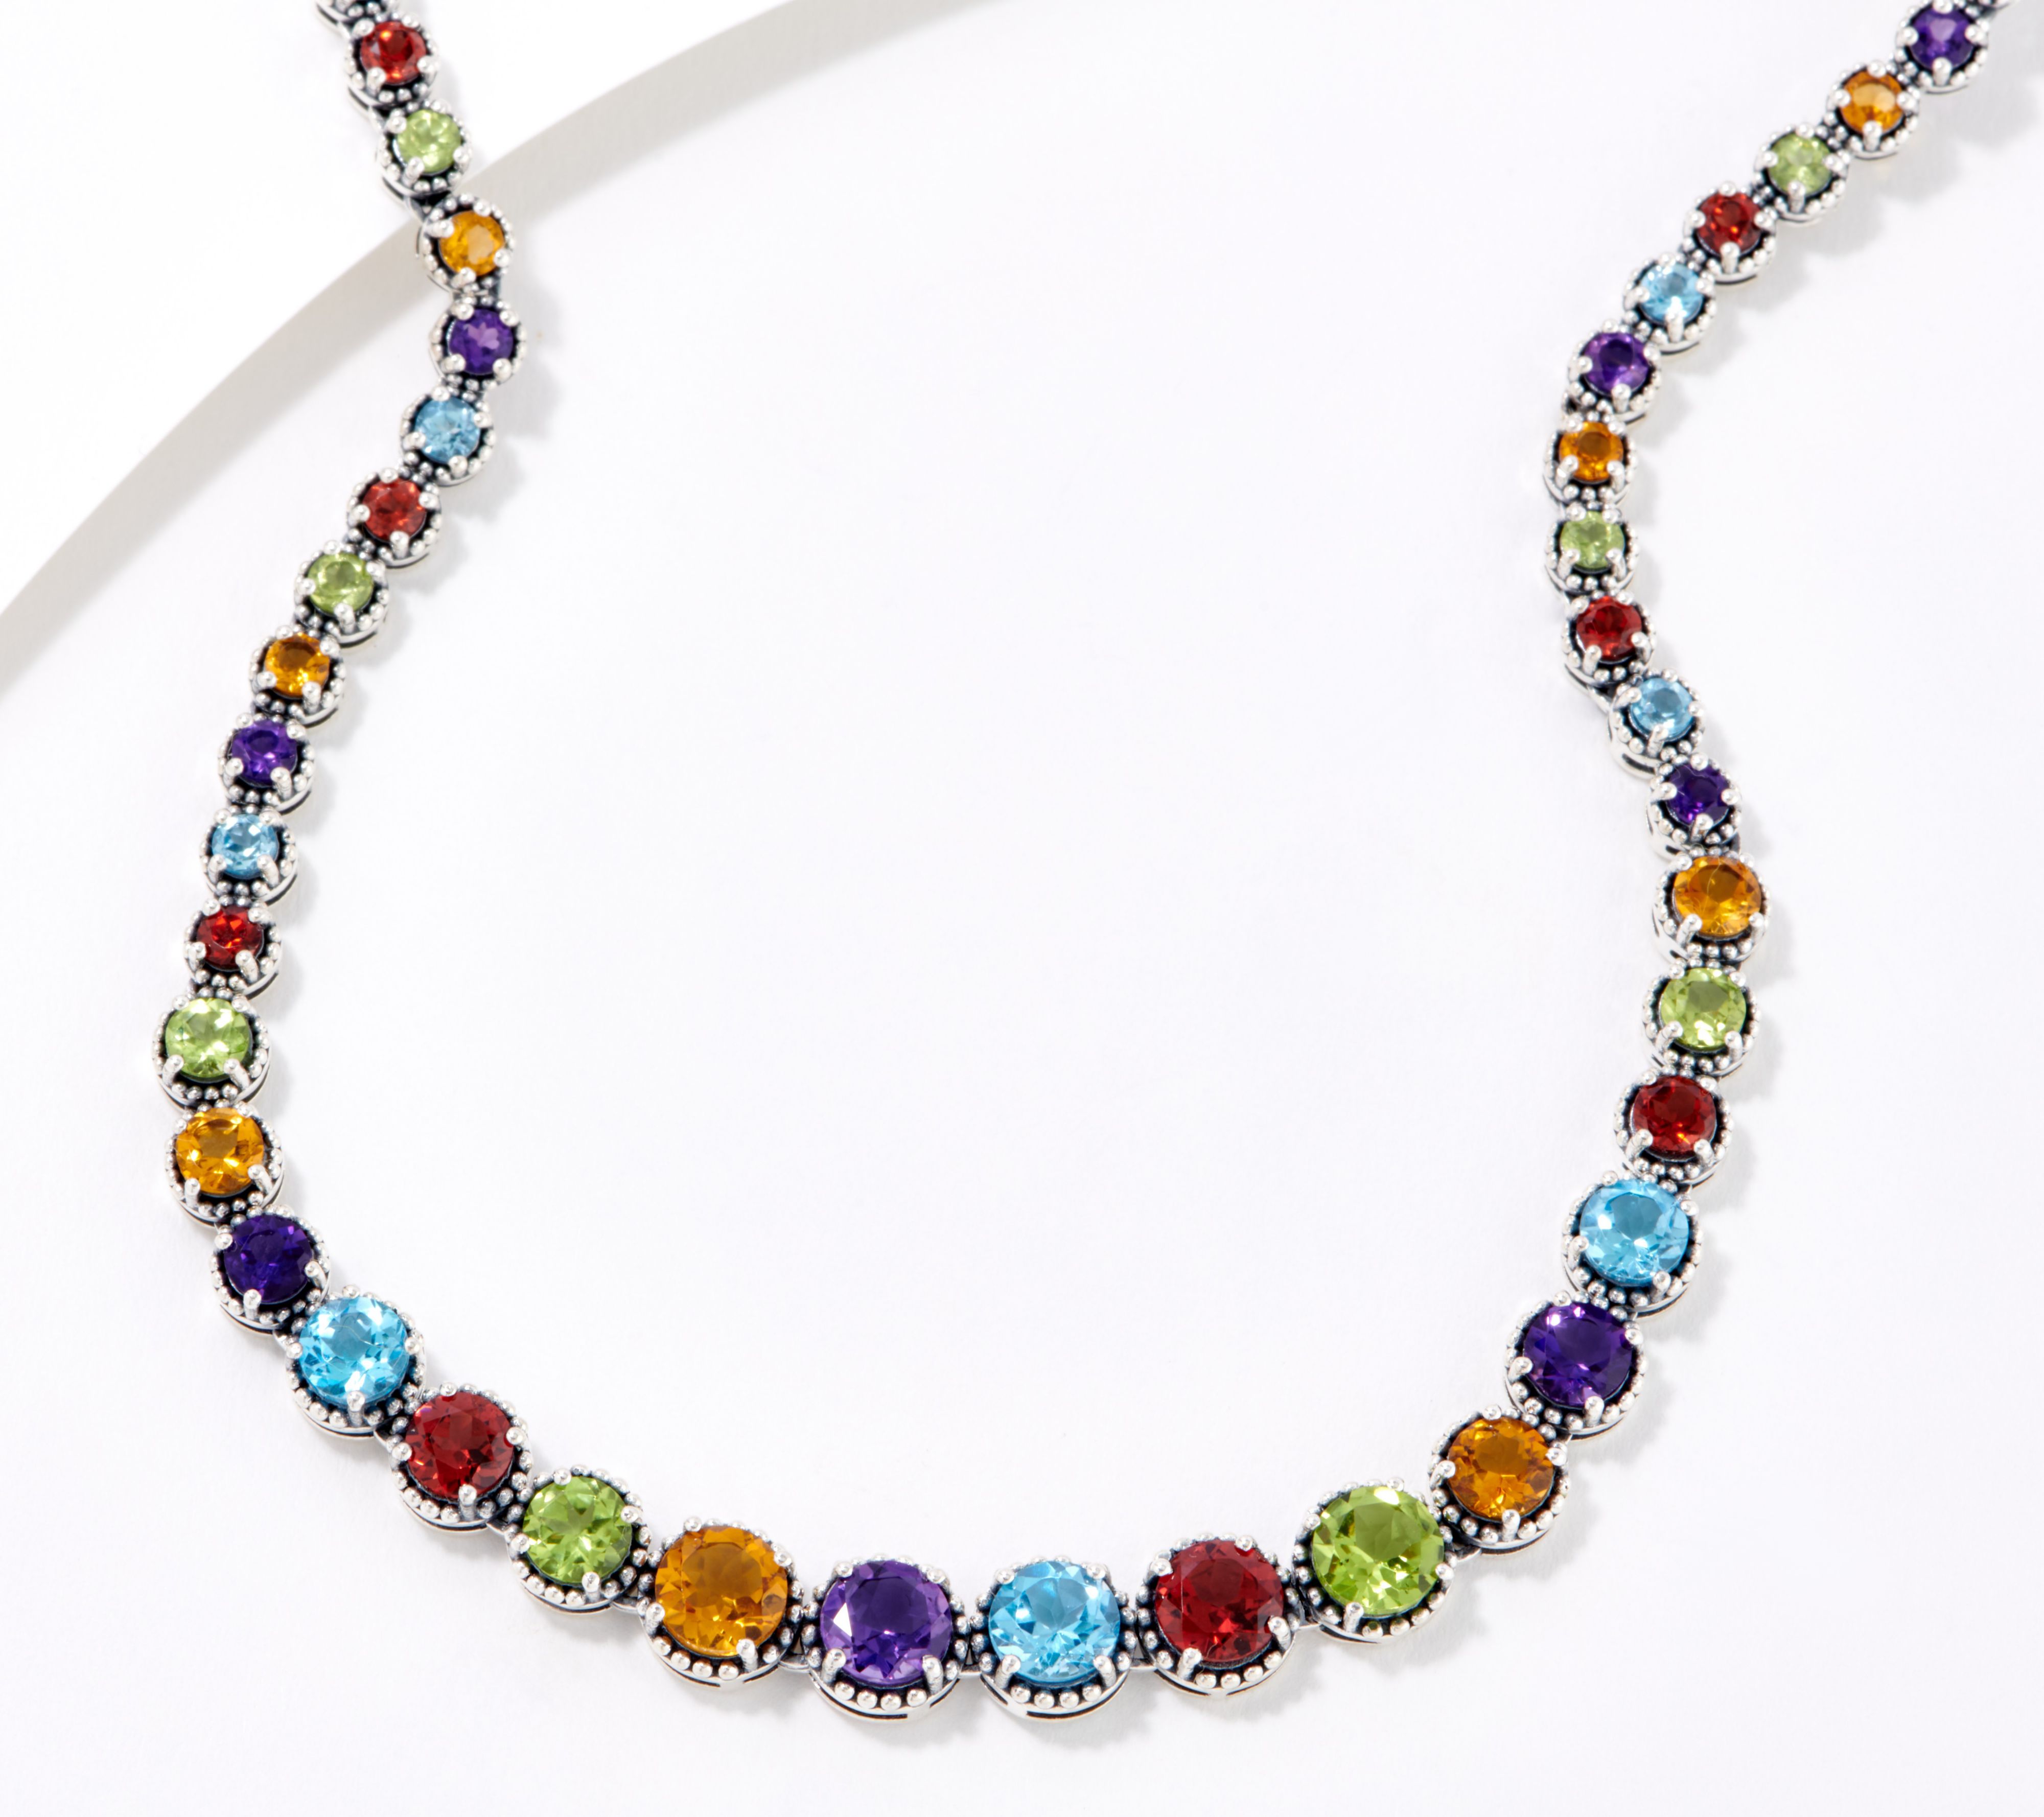 Artisan Crafted Gemstone Tennis Necklace, Sterling Silver - QVC.com